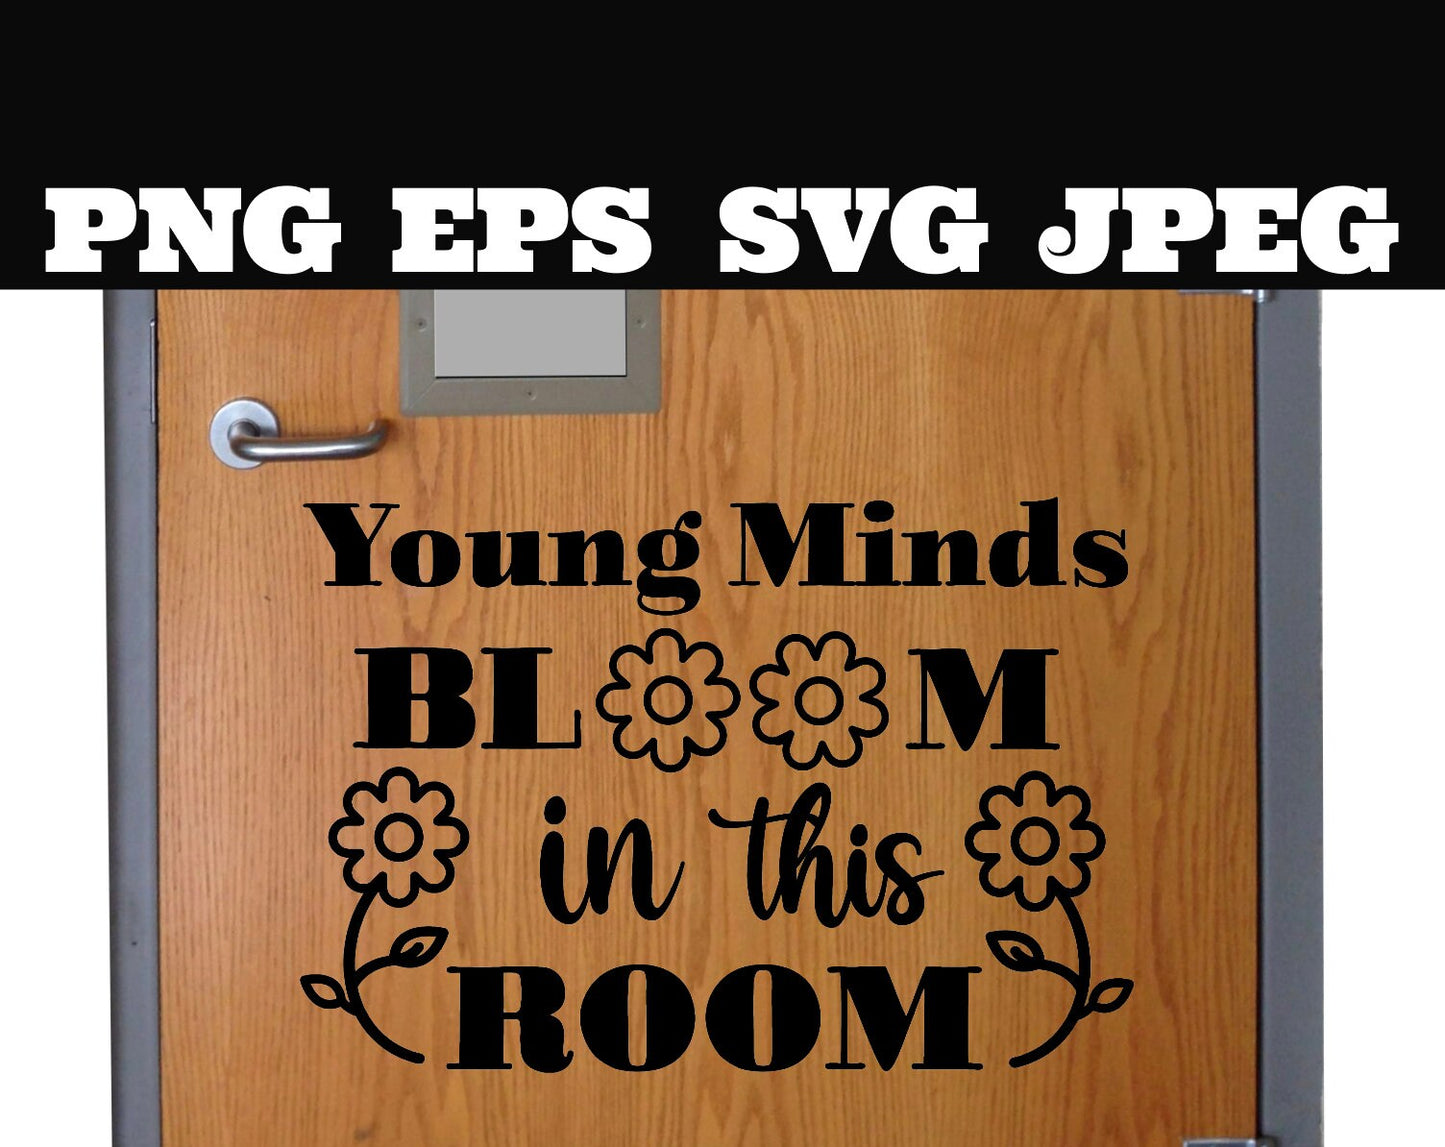 Young minds bloom in this room SVG PNG EPS jpeg cut file - Silhouette Cameo Cricut - Teacher School bloom decoration - Vinyl Posters - Print